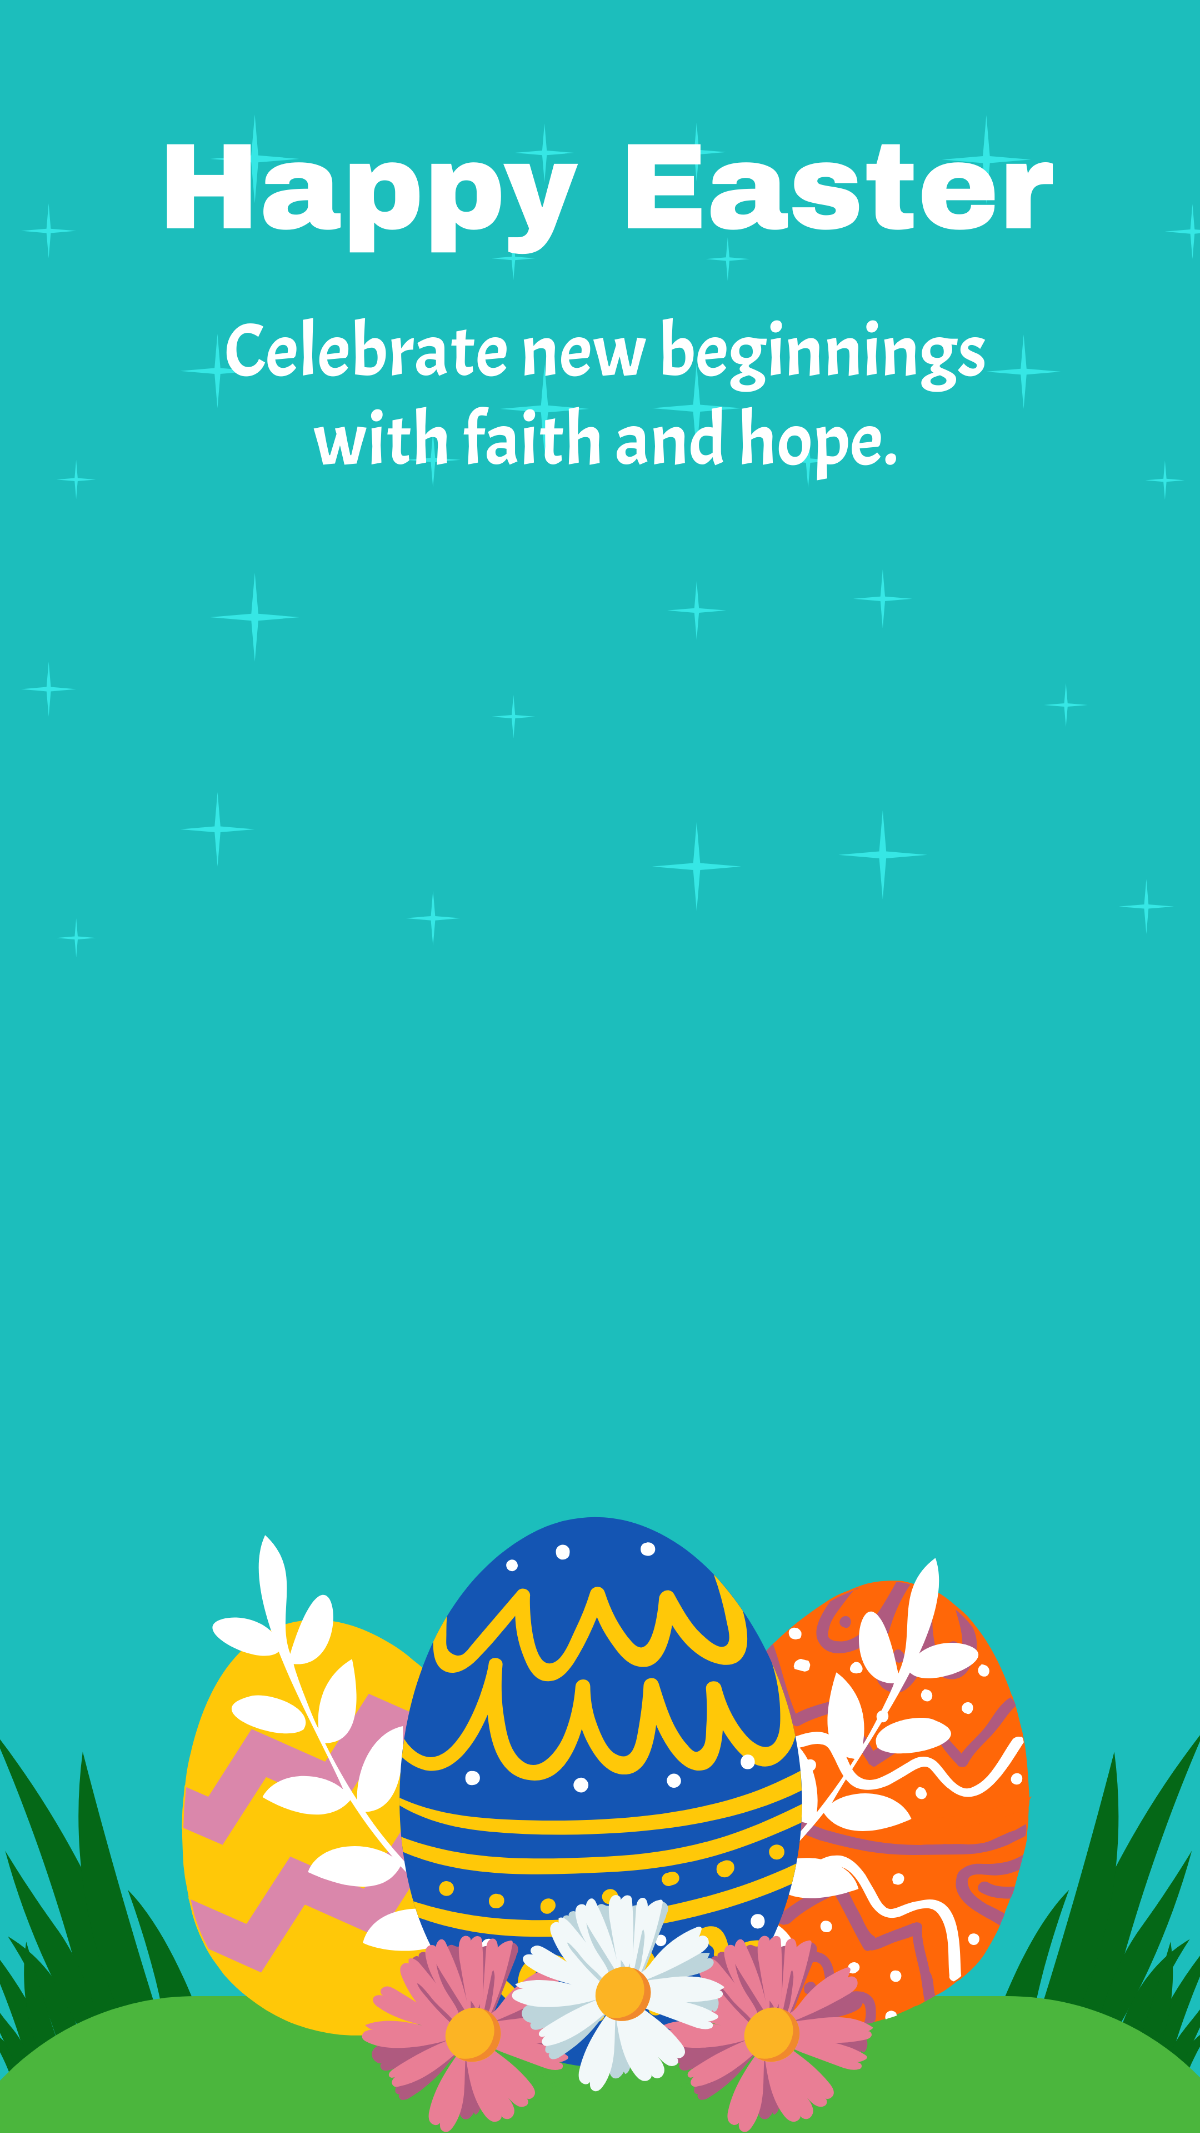 Easter Sunday Snapchat Geofilter Template